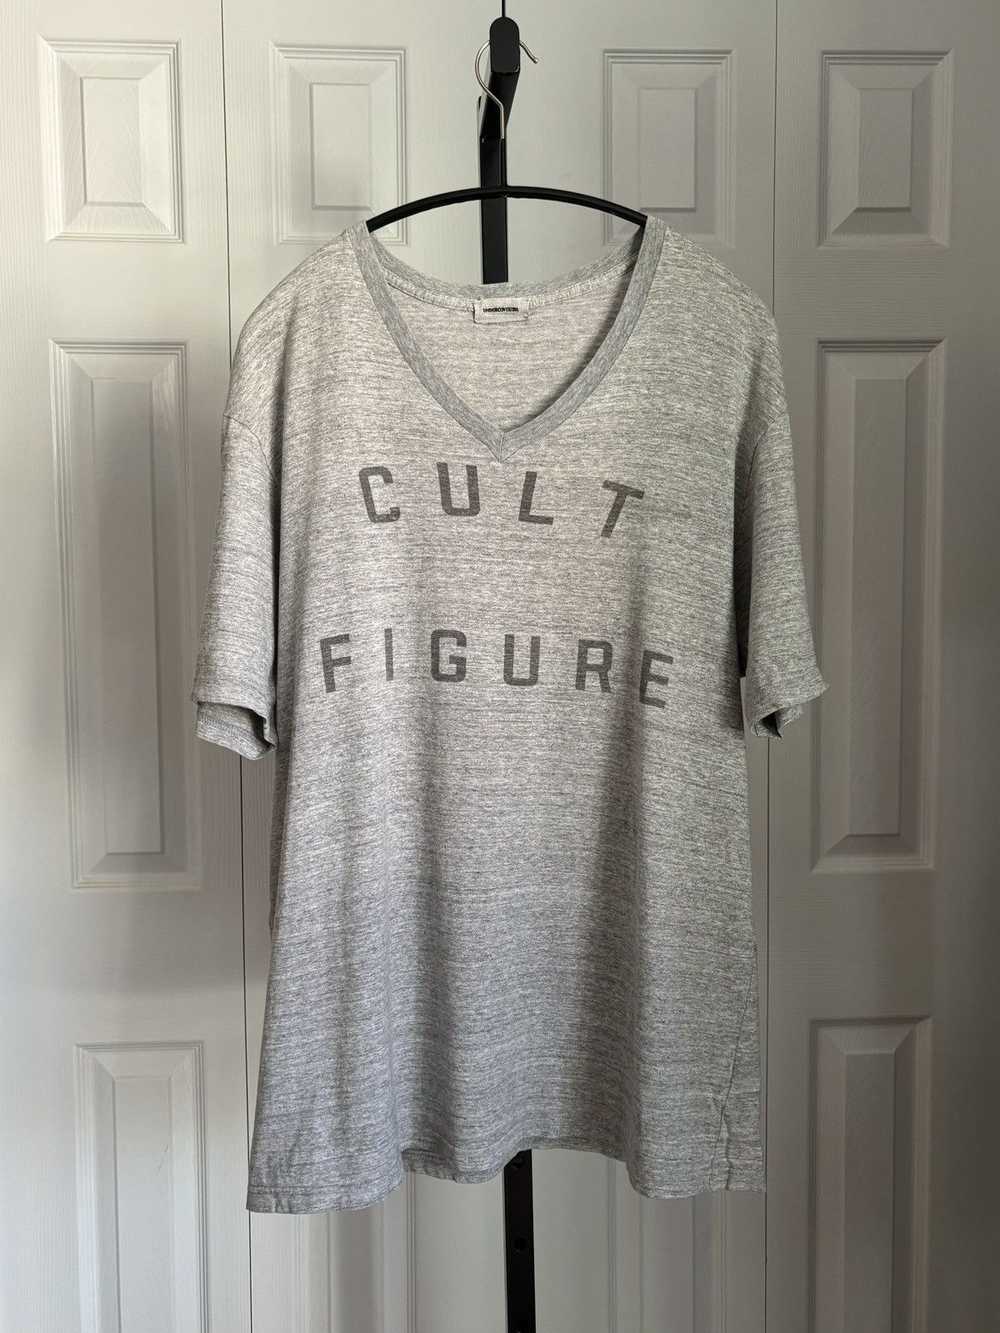 Undercover SS12 Cult Figure V-Neck Tee - image 2